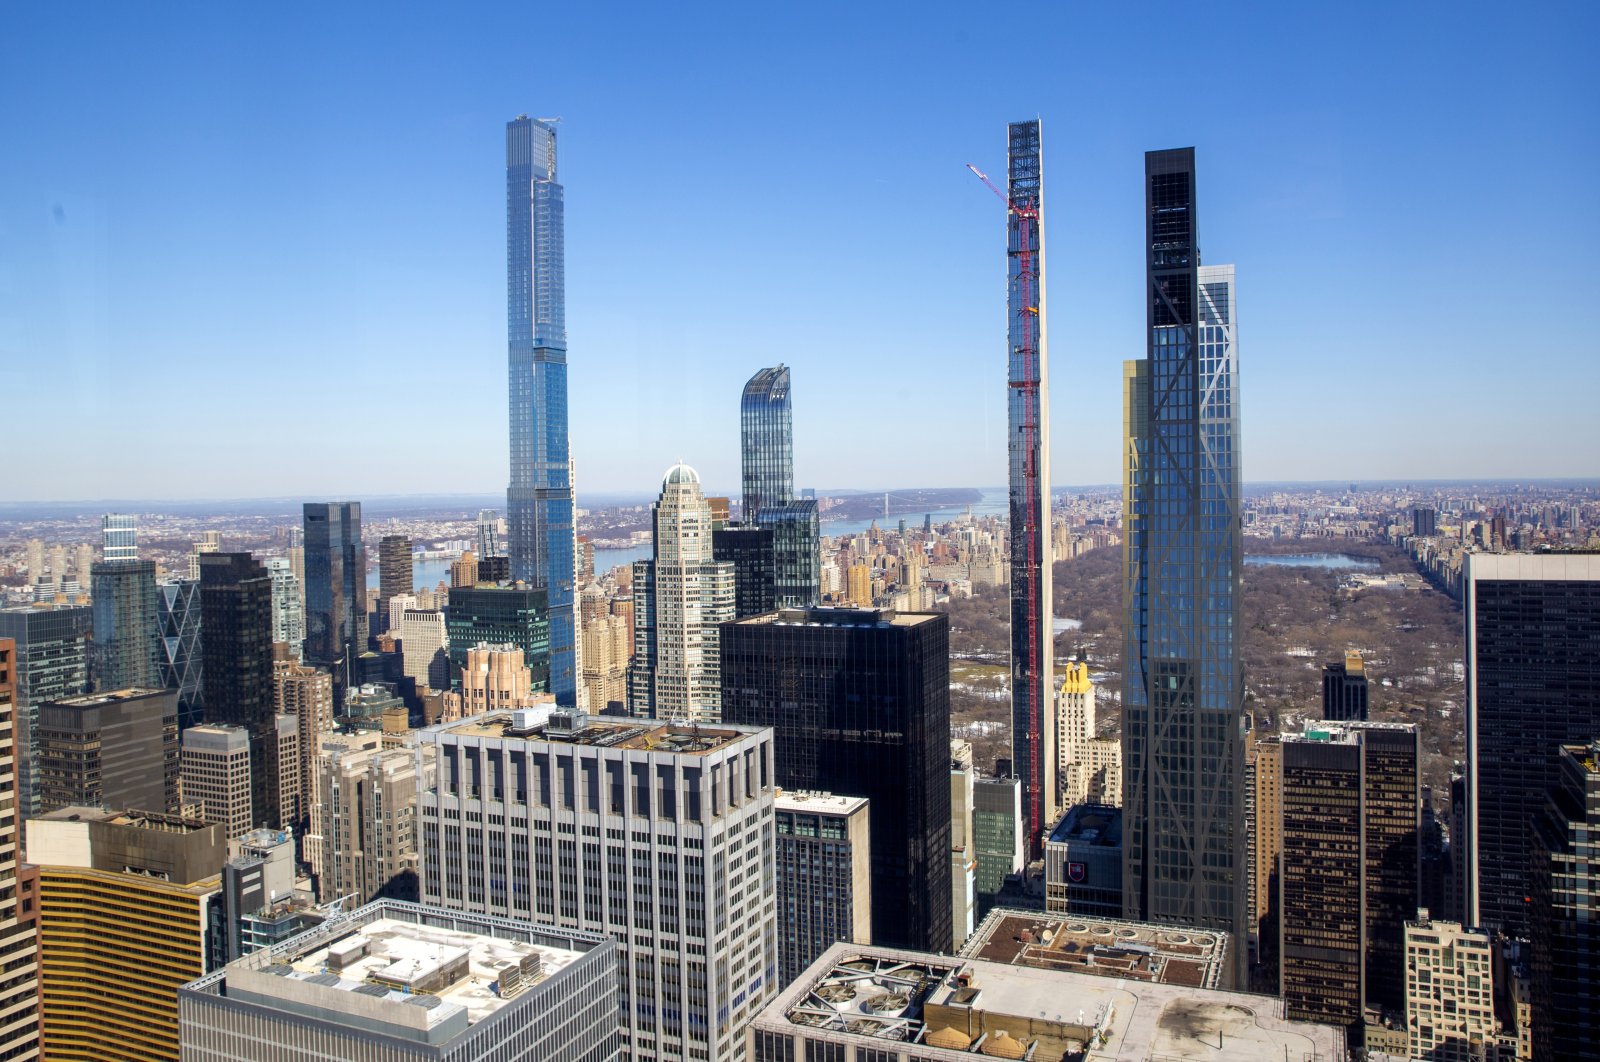 Four residential skyscrapers tower over the skyline south of Central Park in the Manhattan borough of New York City. (L-R), Central Park Tower, One57, Steinway Tower and the MoMA Expansion Tower, U.S., Feb. 26, 2021. (AP Photo)